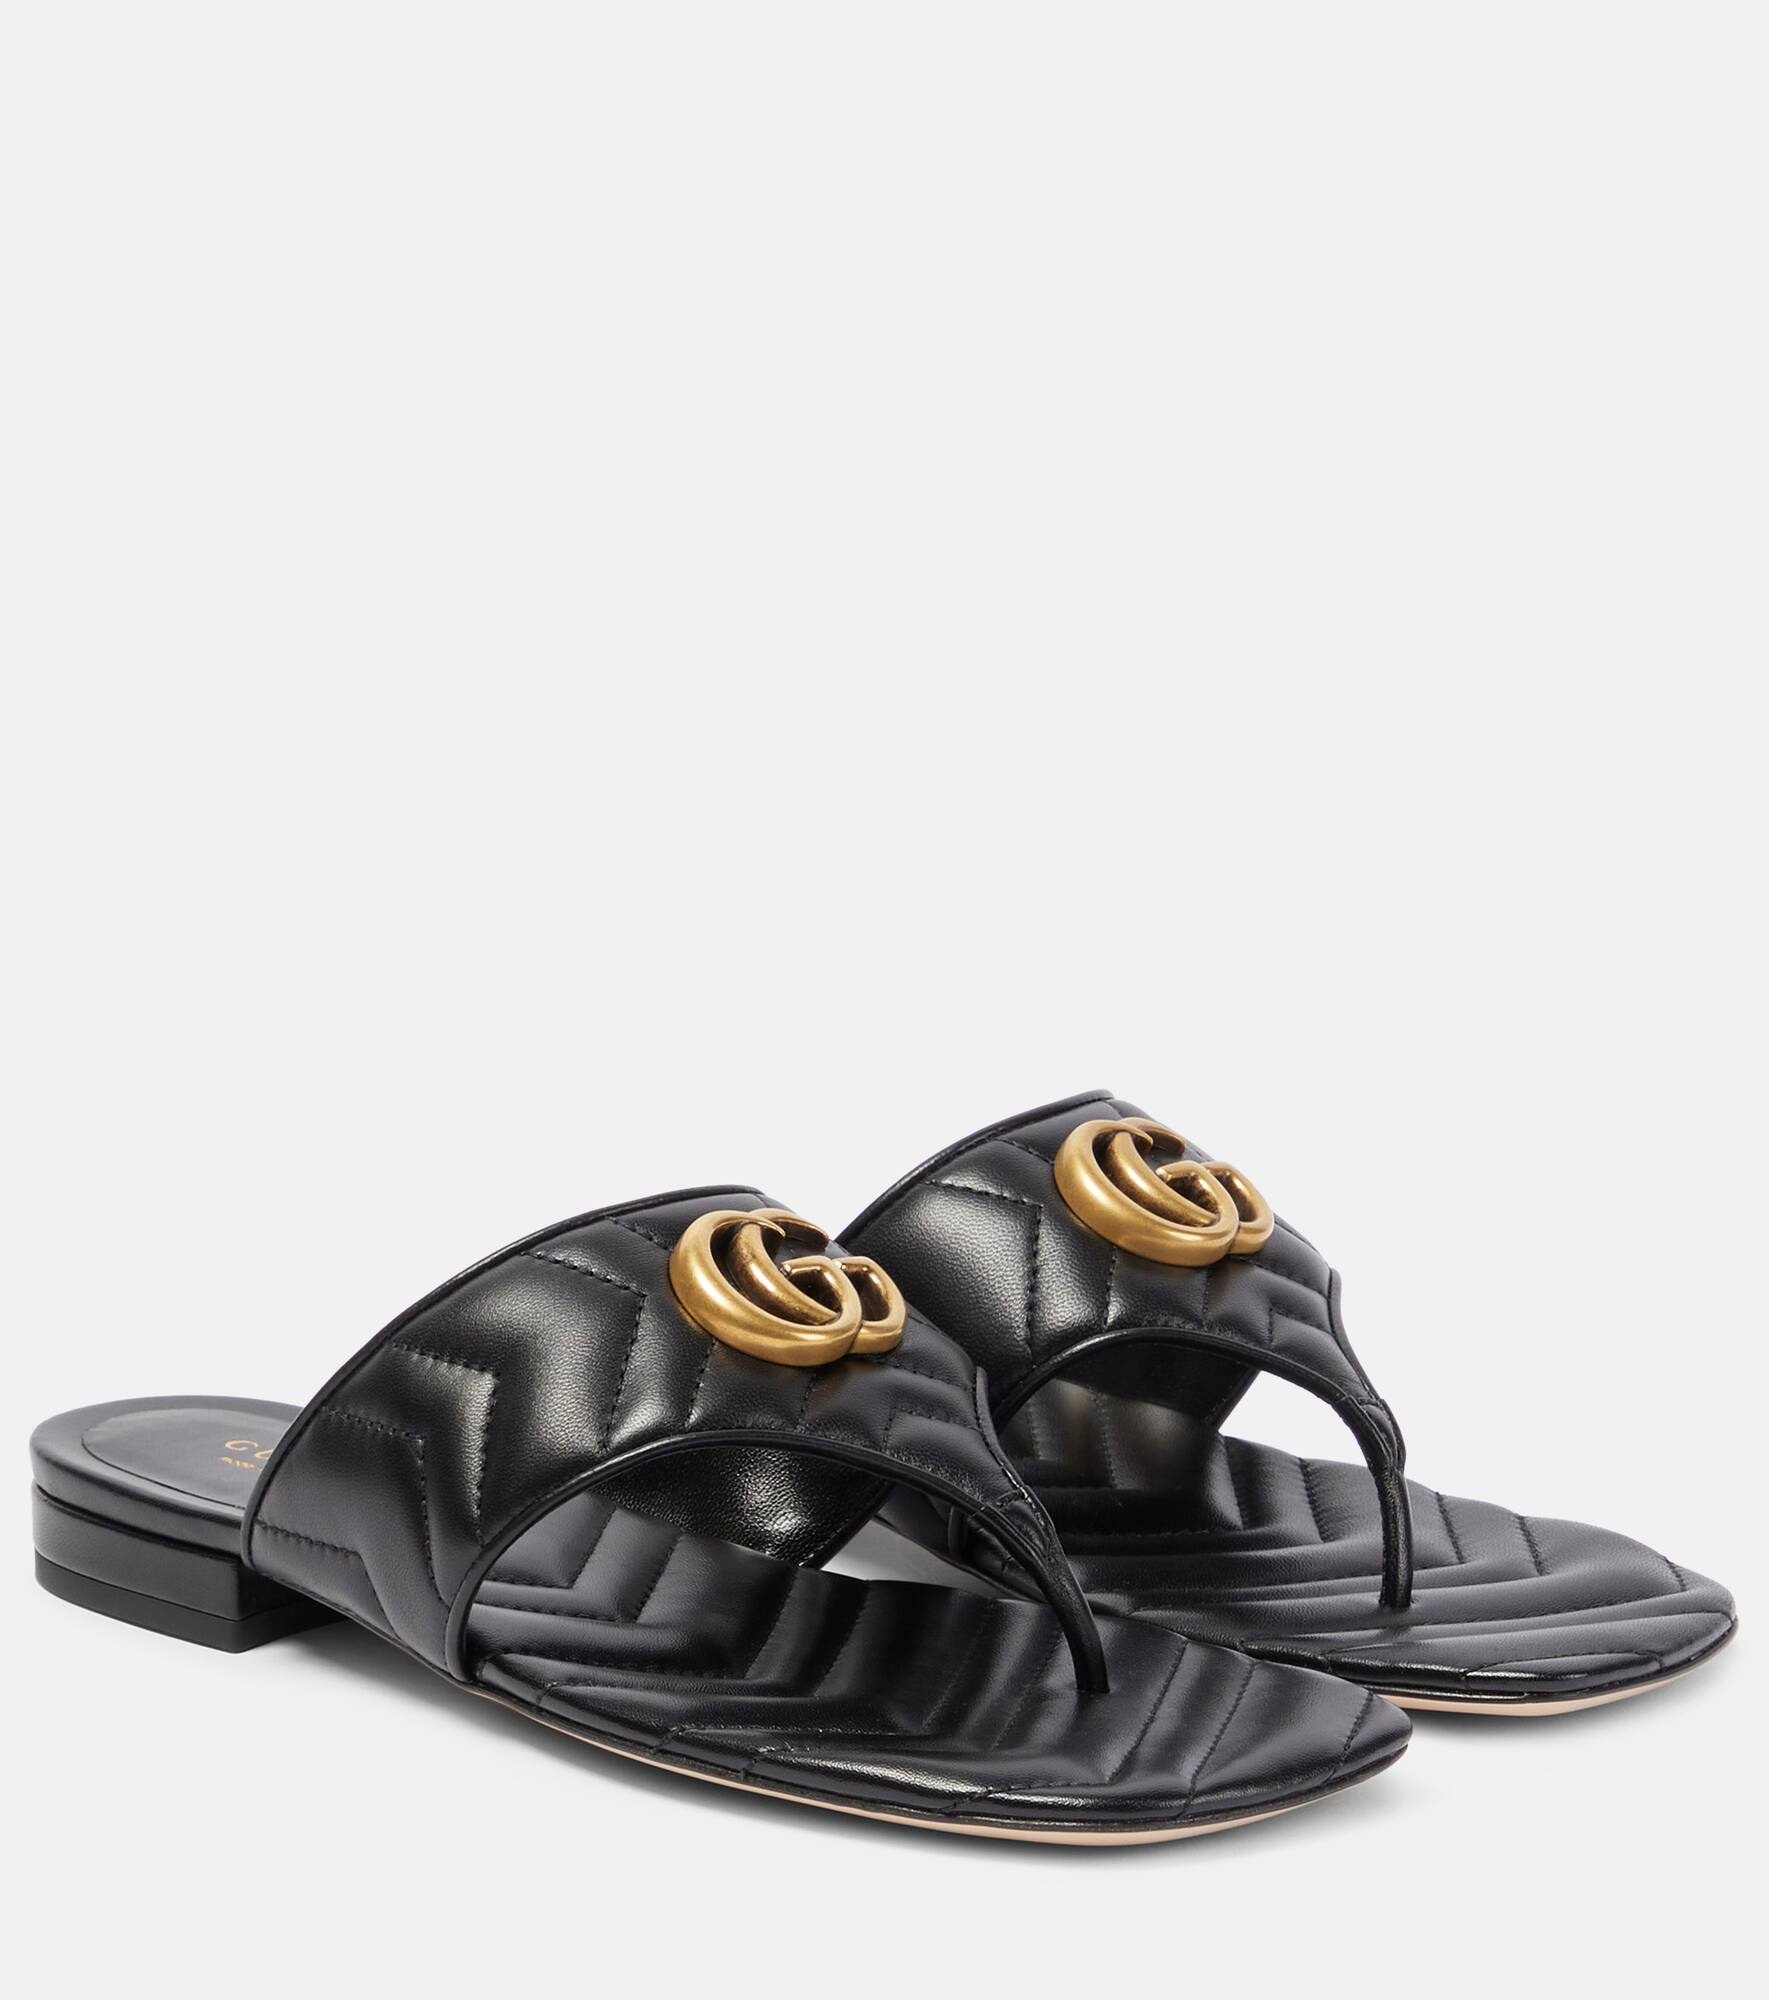 GG Marmont leather thong sandals - 1